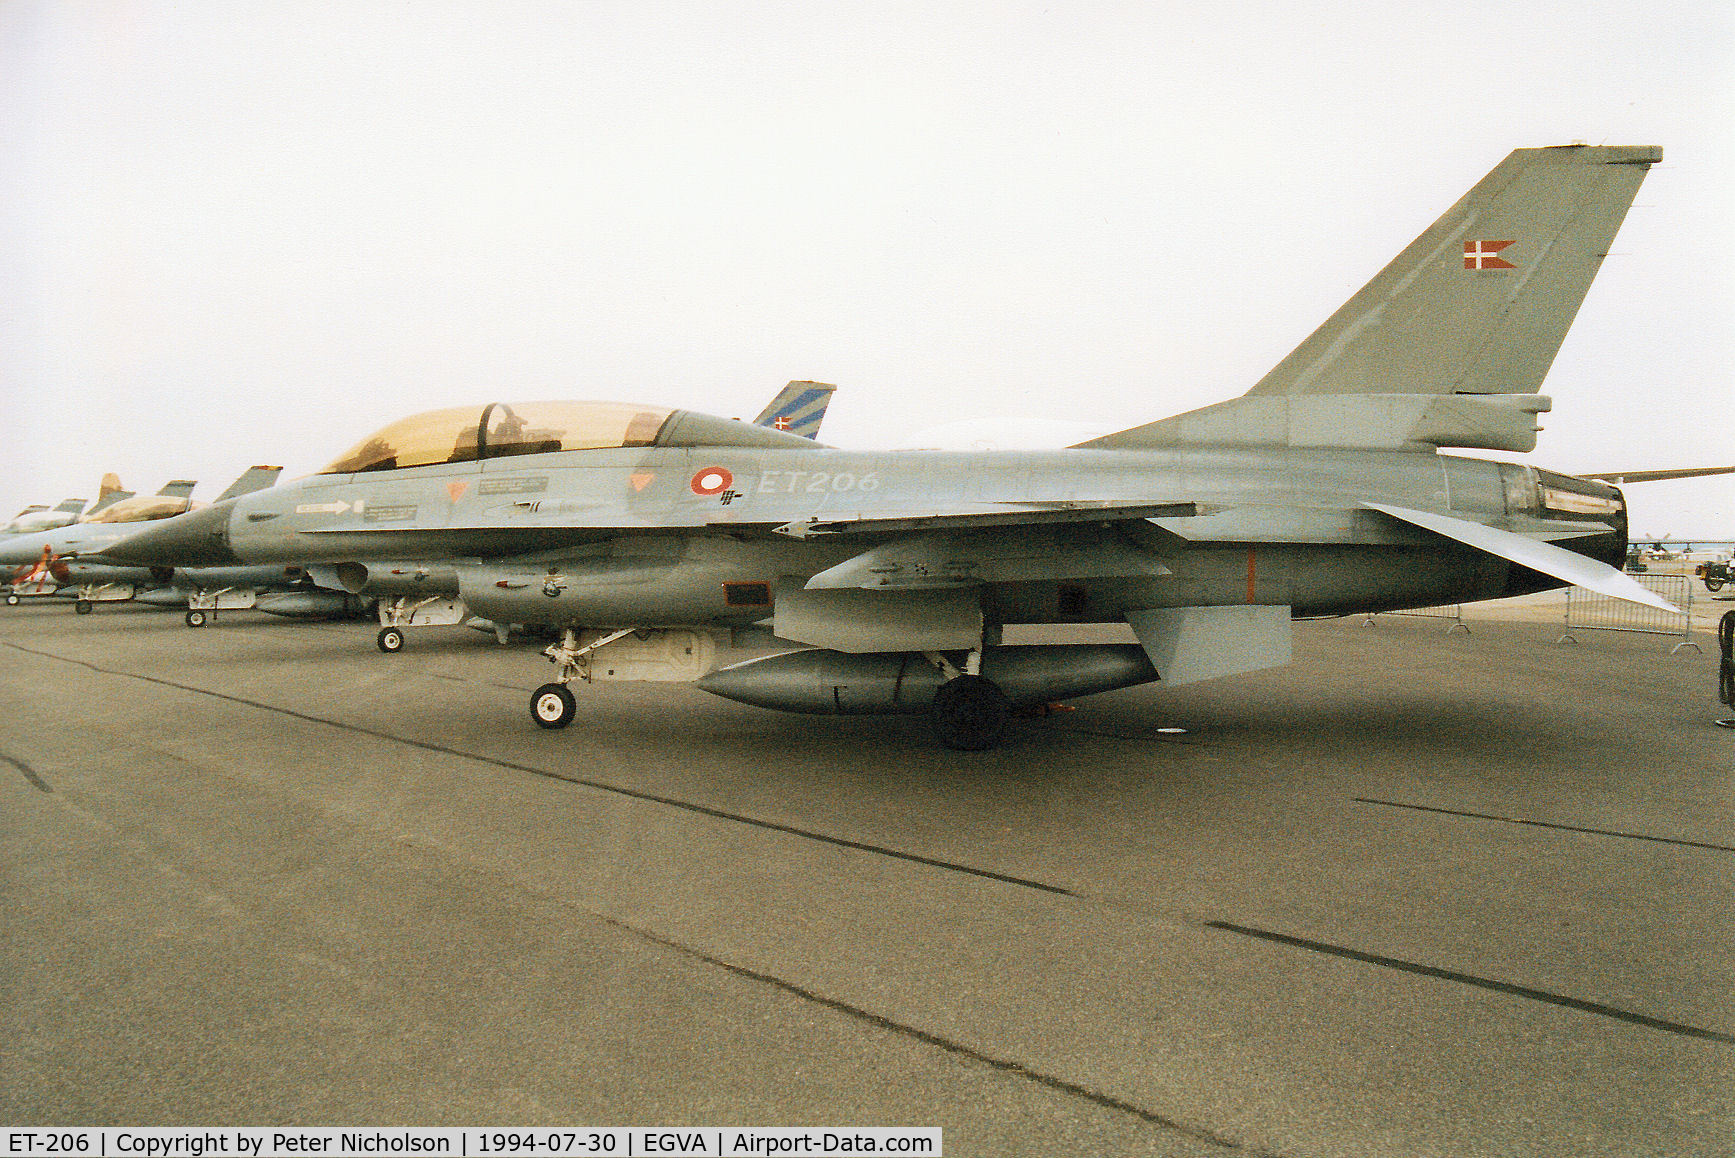 ET-206, General Dynamics F-16B C/N 6G-3, F-16B Falcon of Eskradille 730 of the Royal Danish Air Force at Skrydstrup Air Base on display at the 1994 Intnl Air Tattoo at RAF Fairford.